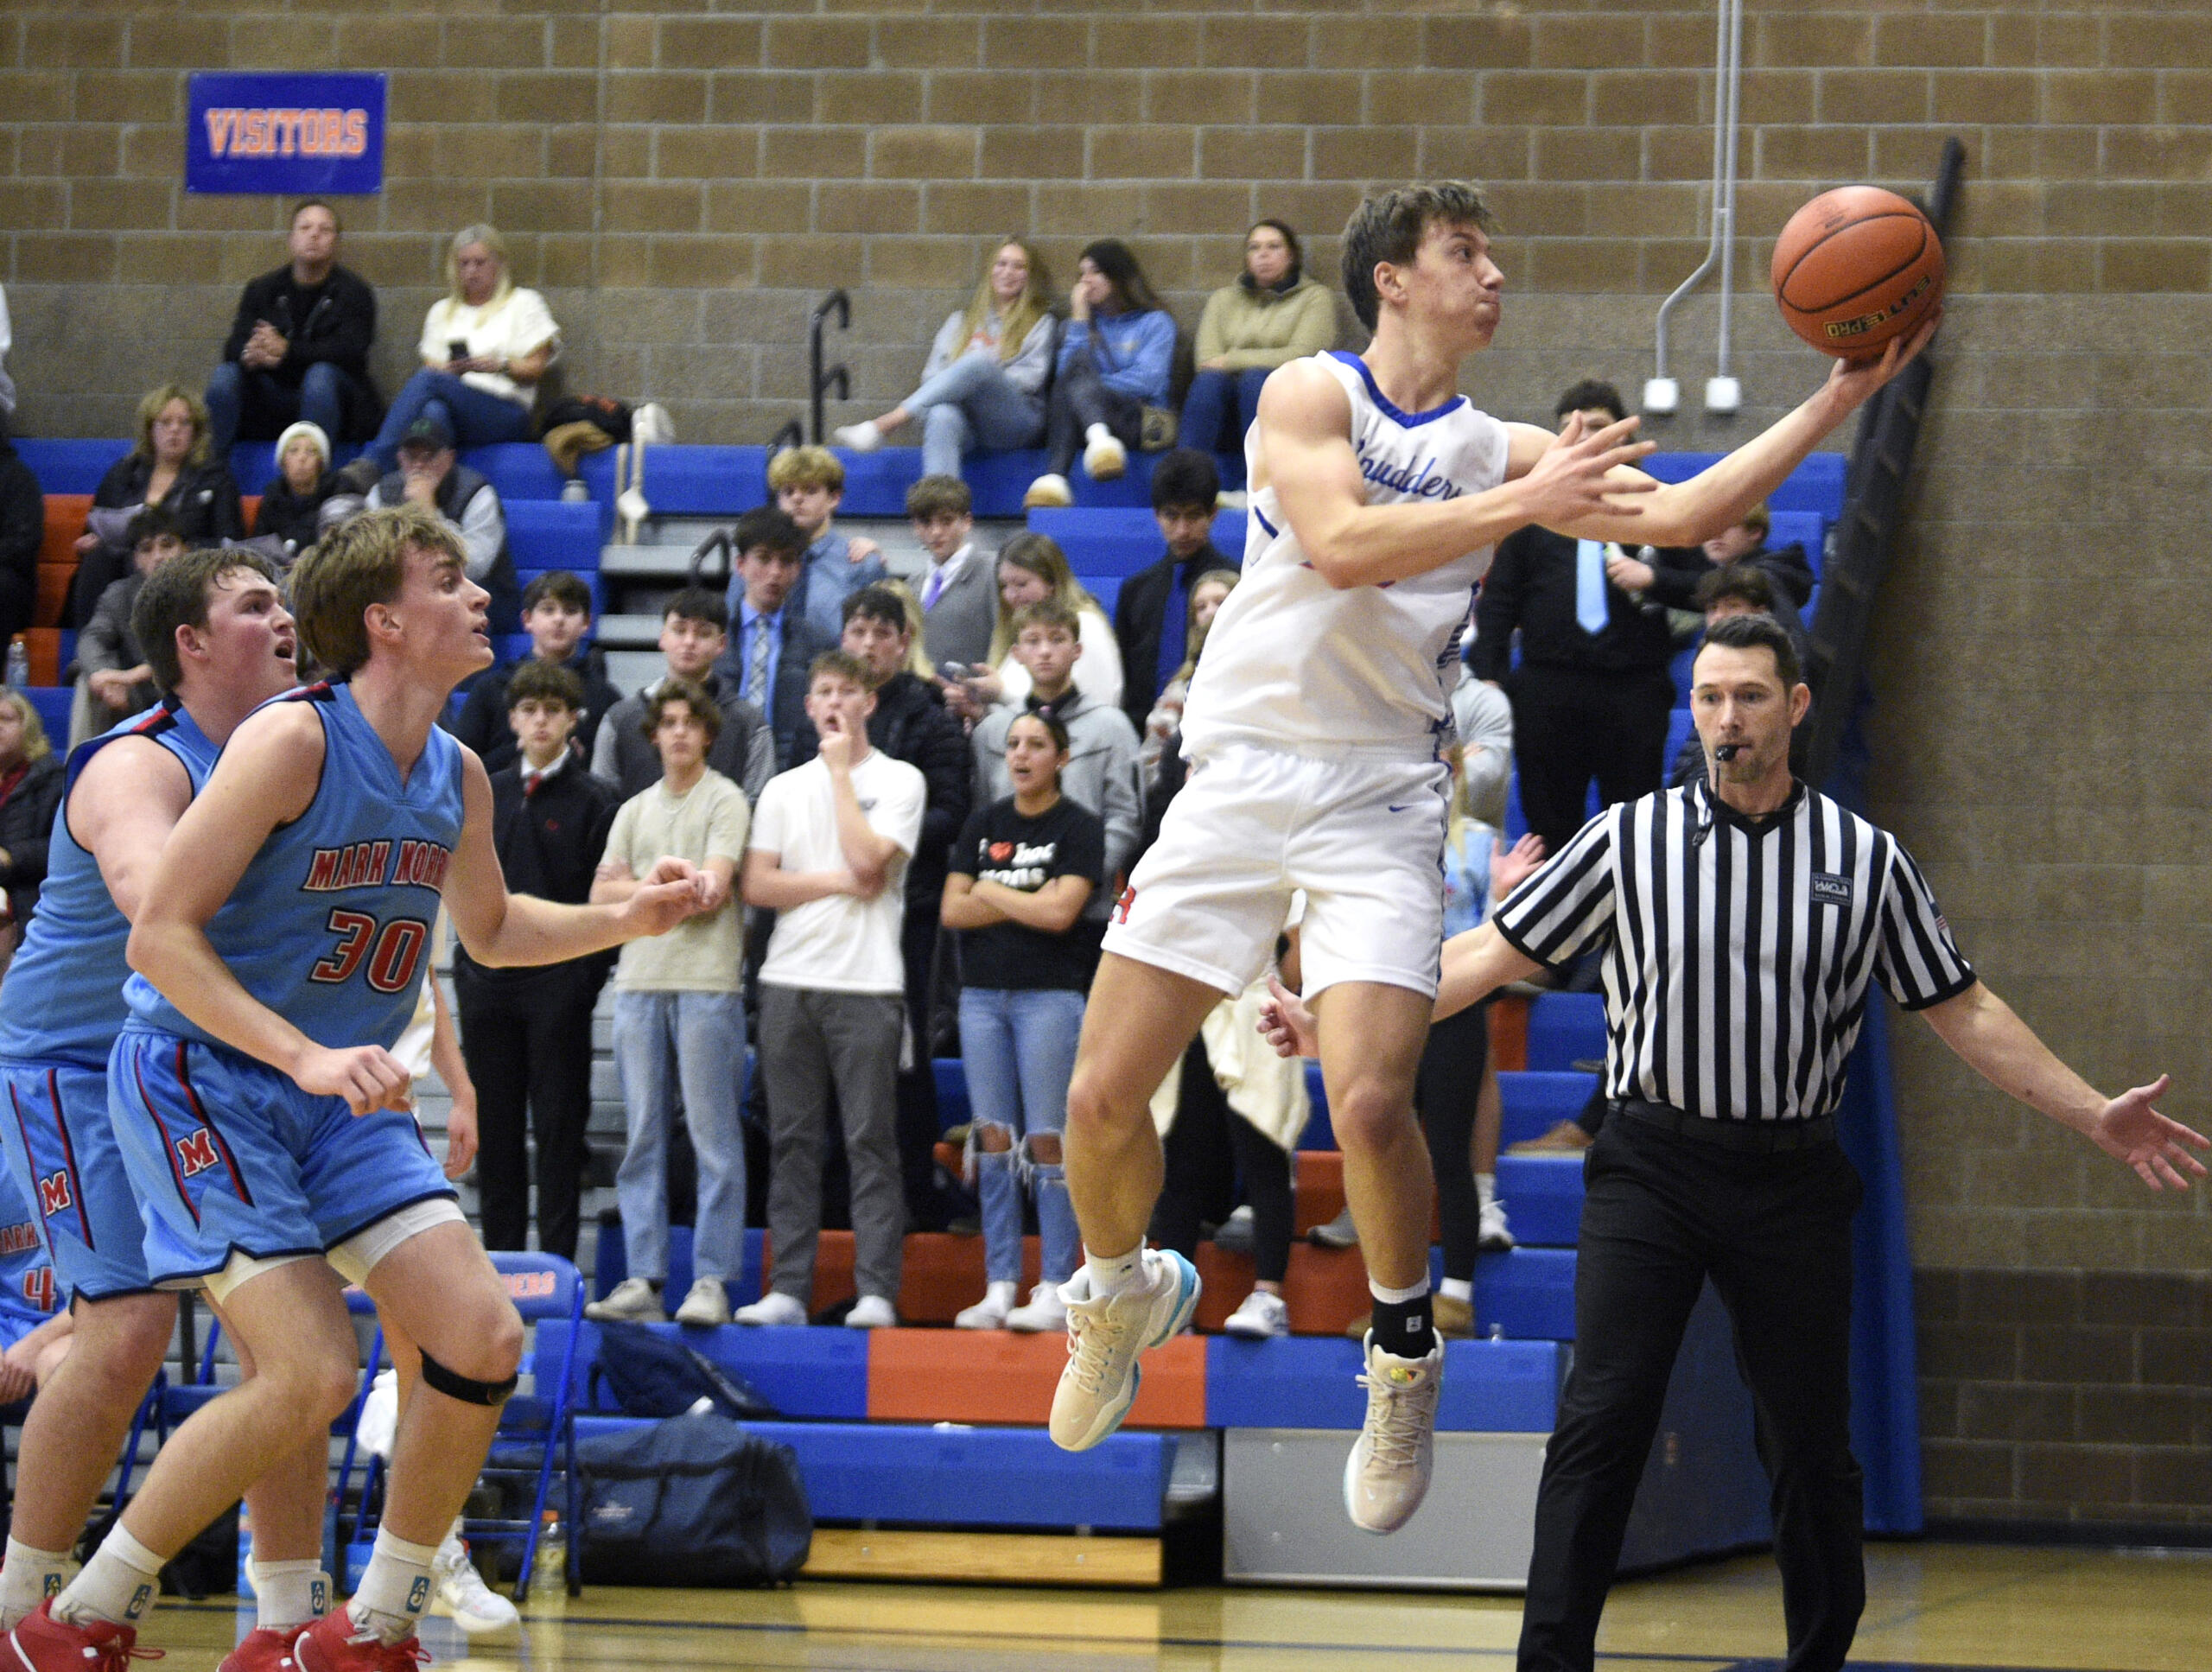 Ridgefield’s Jack Hughes leaps to save a ball from going out of bounds in a 2A Greater St. Helens League boys basketball game against Mark Morris on Thursday, Dec. 7, 2023, at Ridgefield High School.